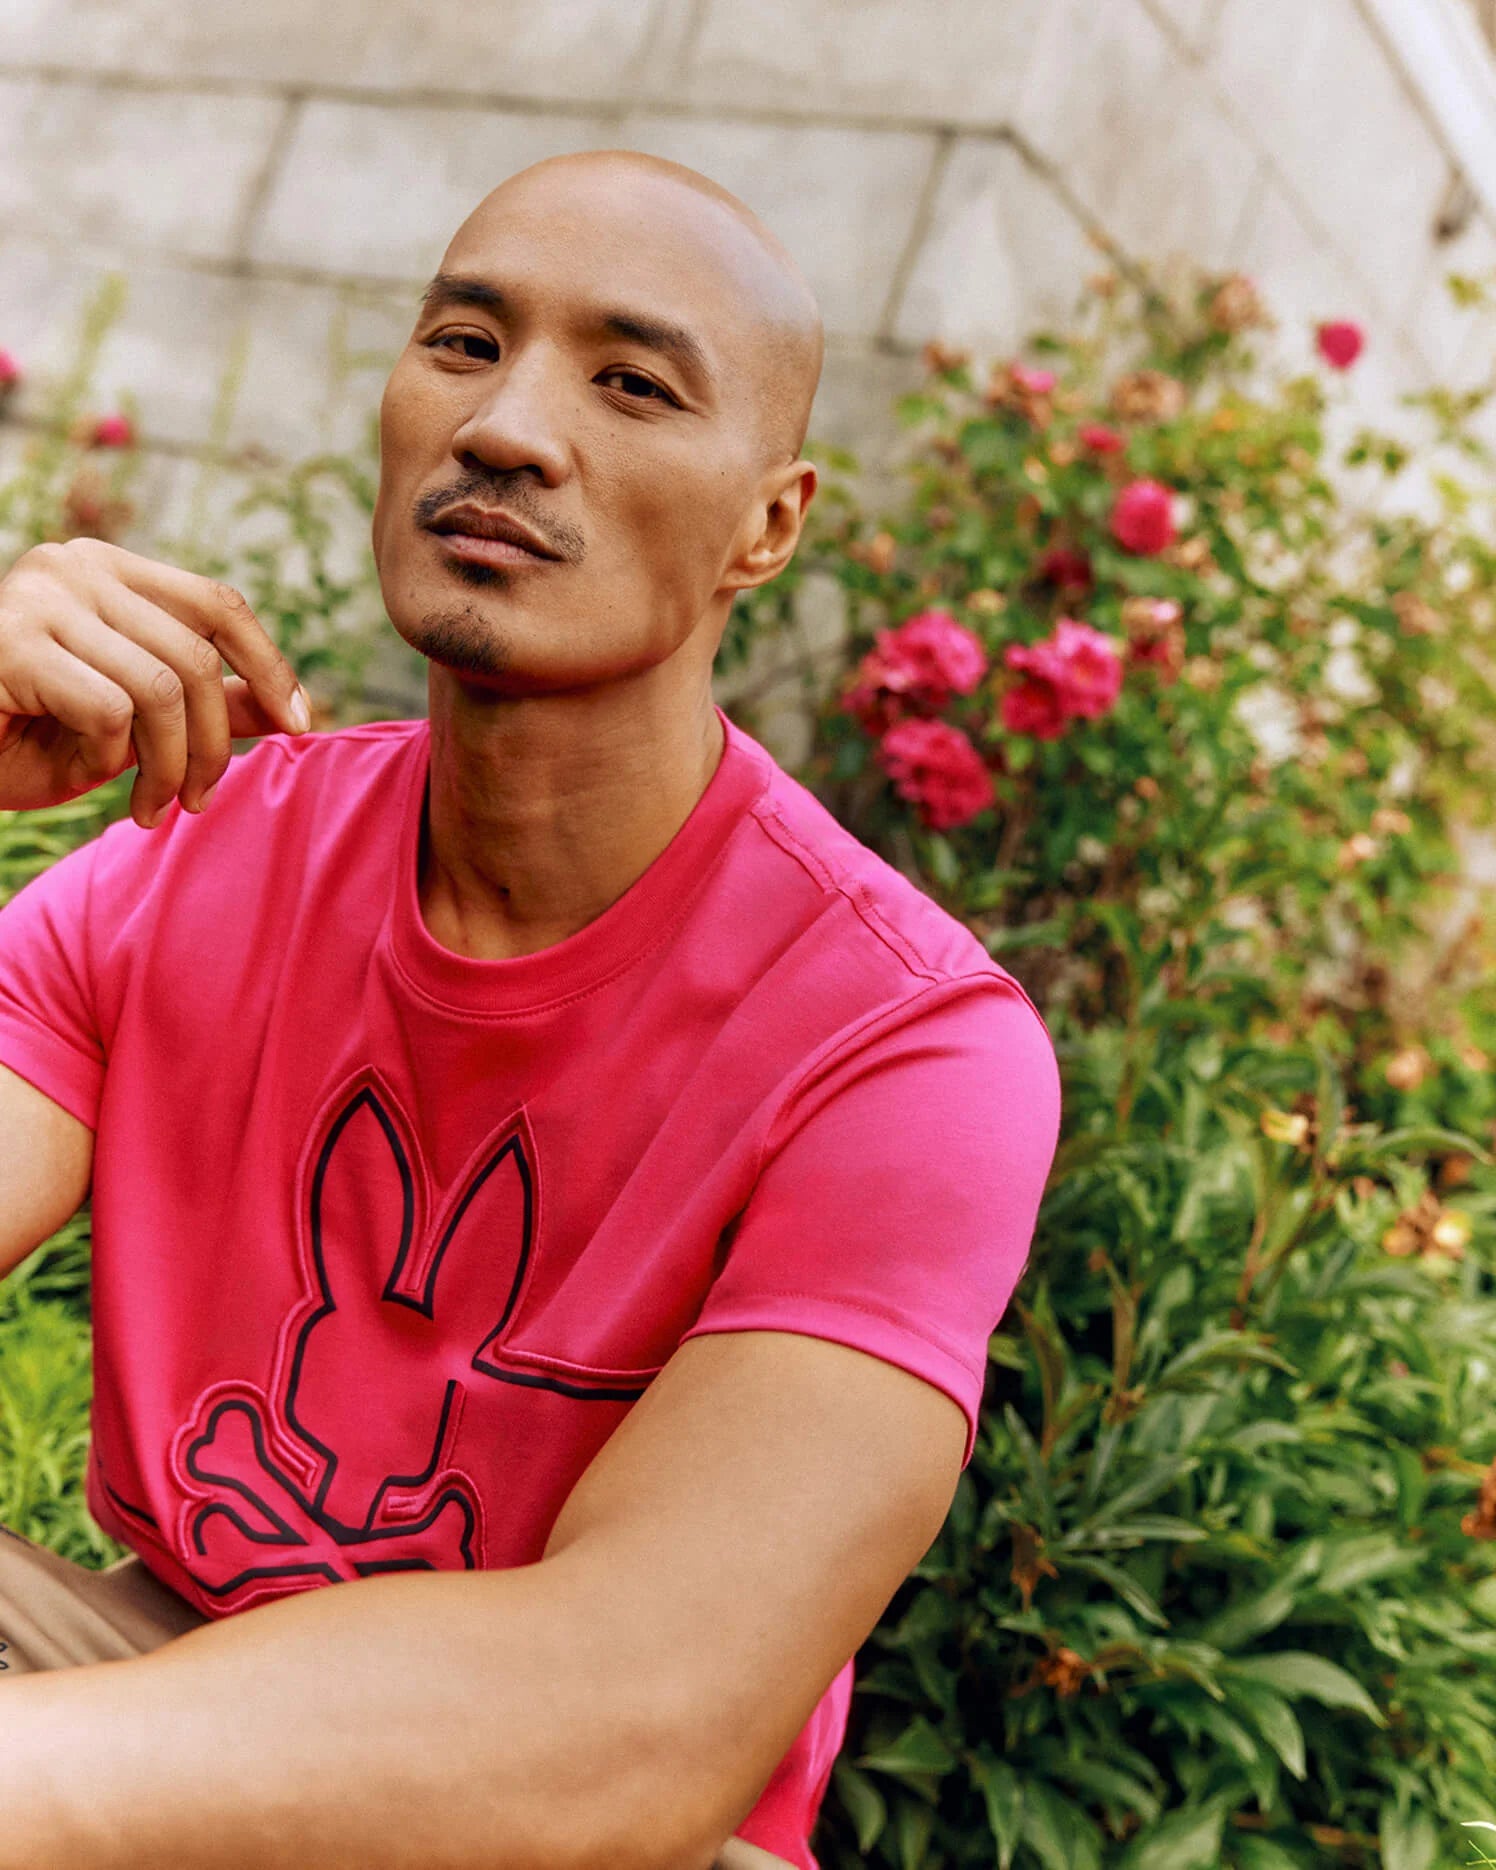 Psycho Bunny Chester Embroidered Graphic Tee | Chicago City Sports